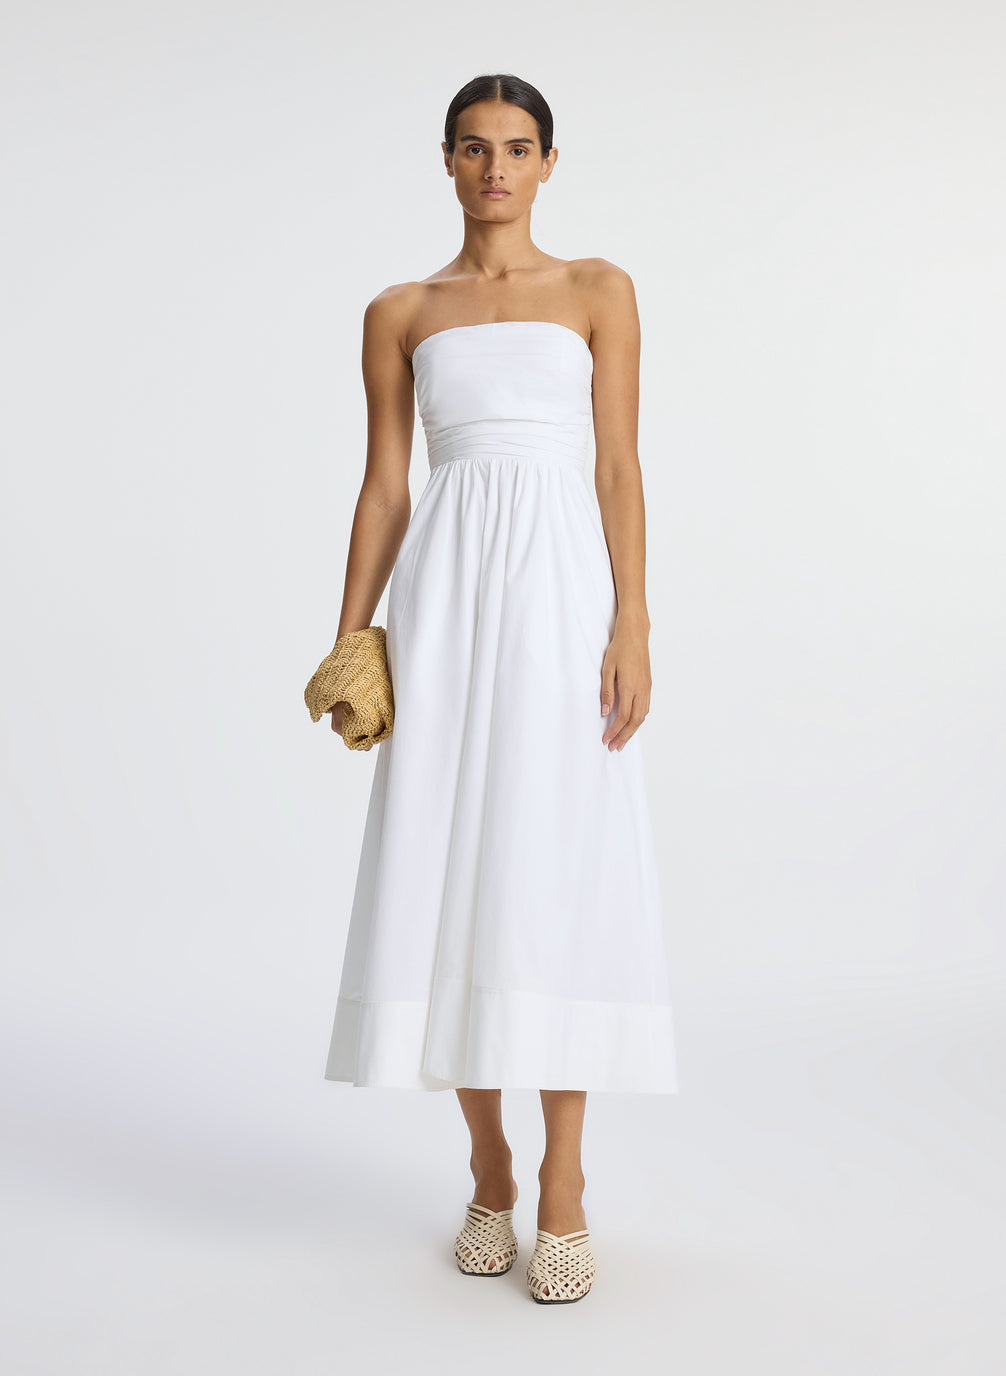 front view of woman wearing white strapless midi dress